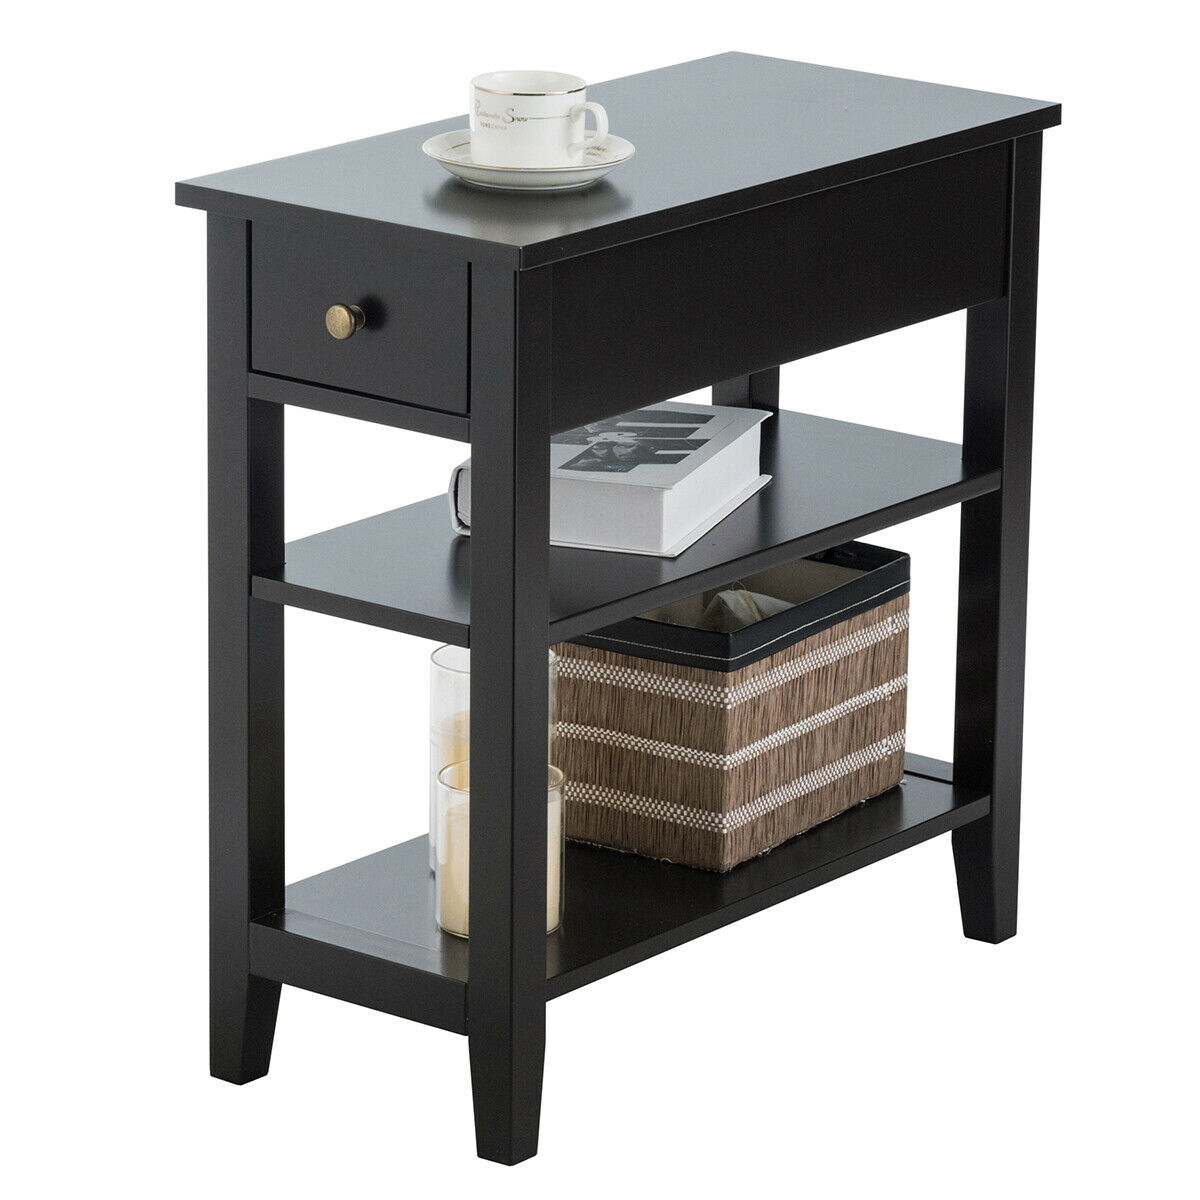 3 Tier Nightstand Bedside Table Sofa Side End Table W/Double Shelves Drawer - Black